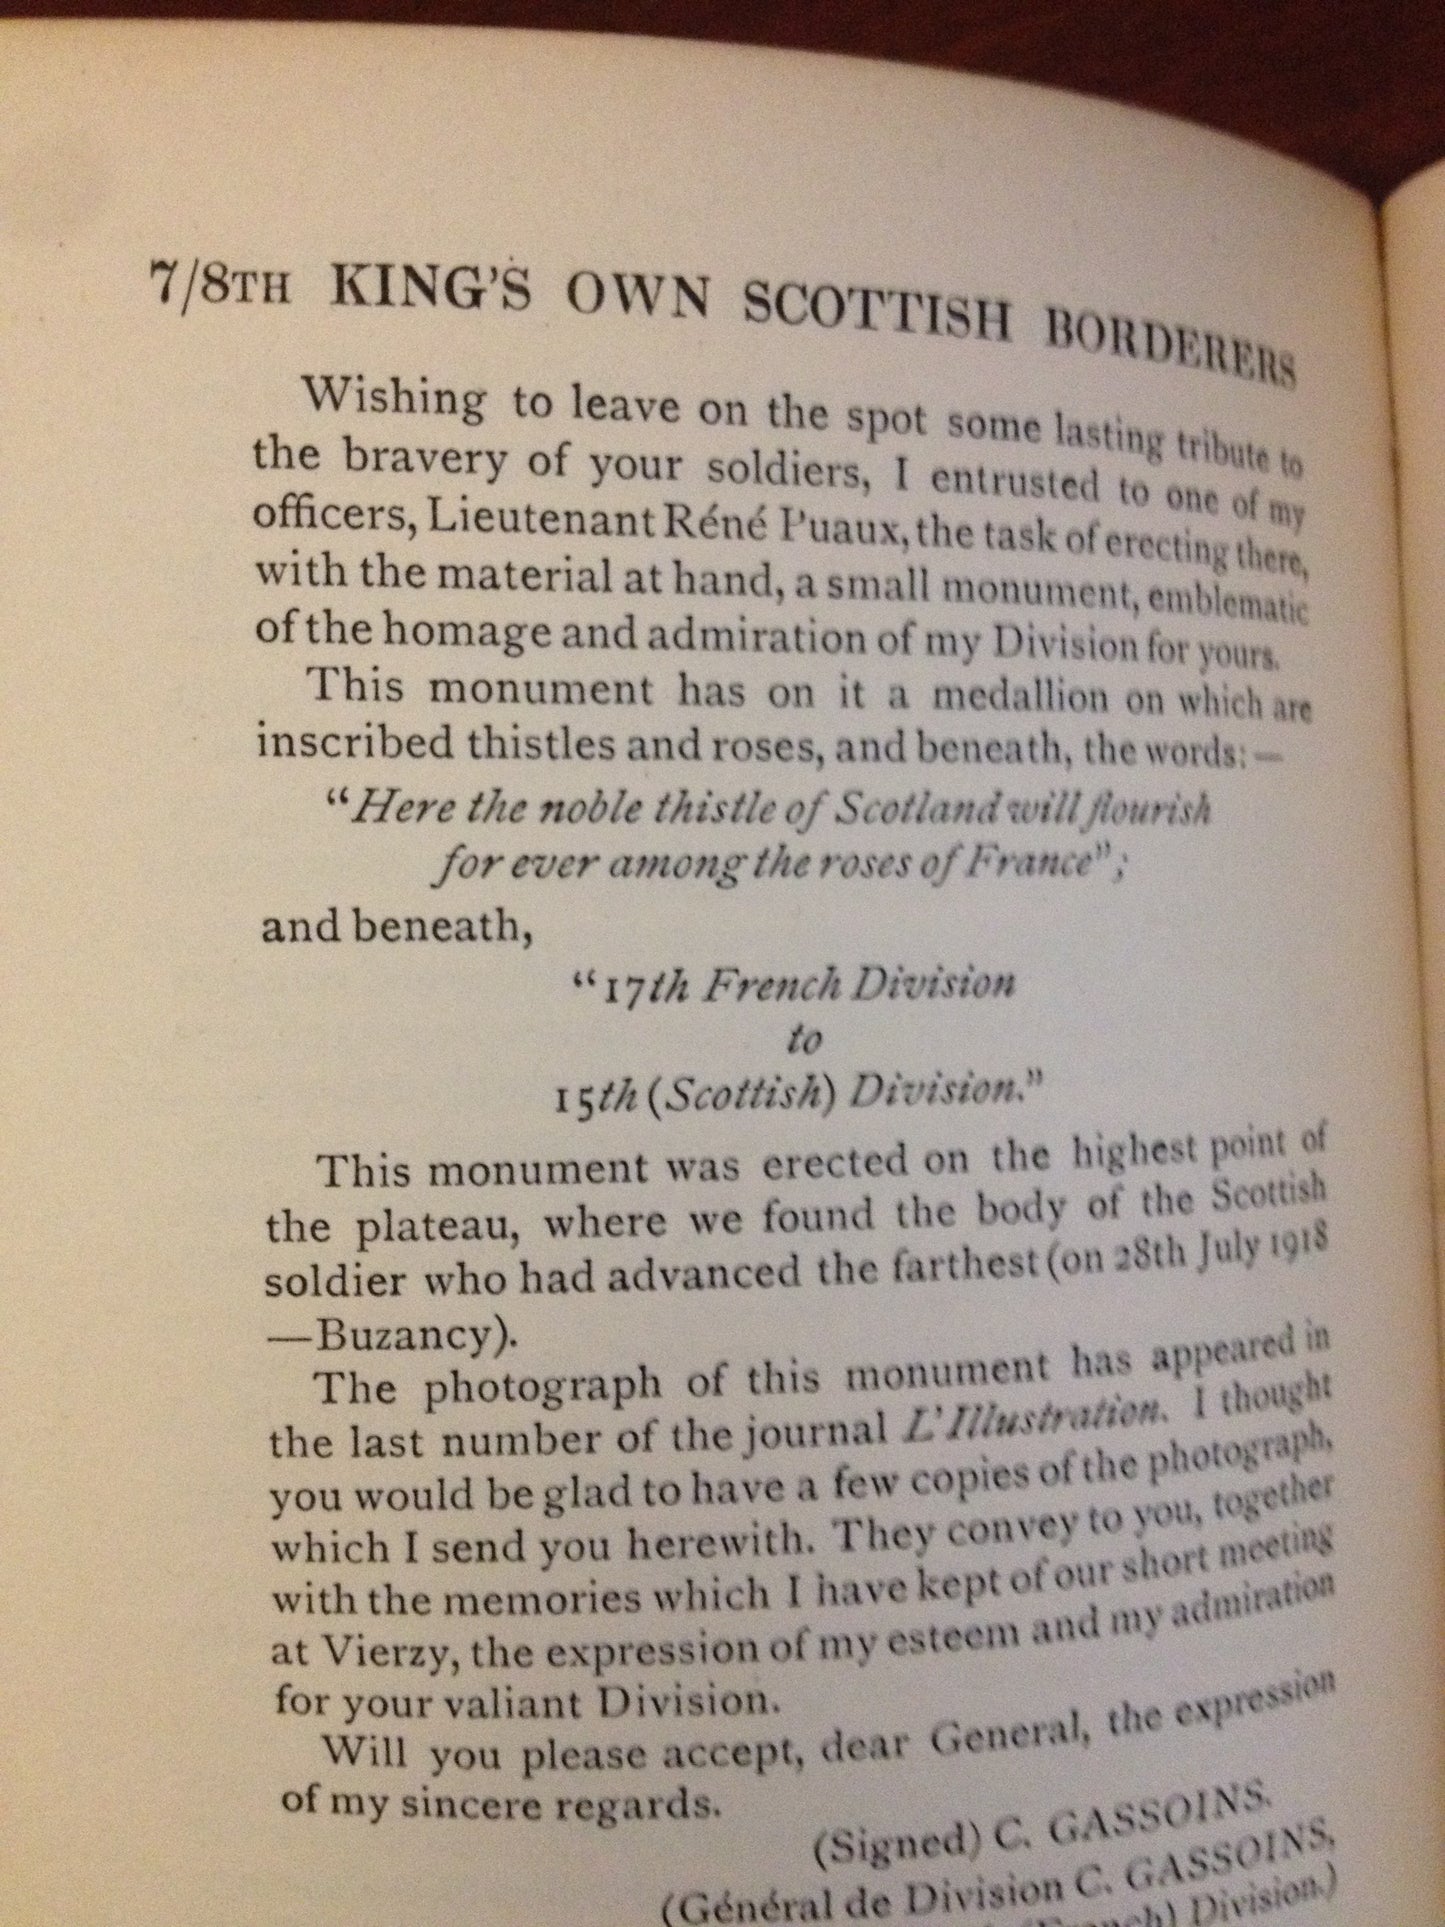 A BORDER BATTALION THE 7/8TH KINGS OWN SCOTTISH BORDERERS